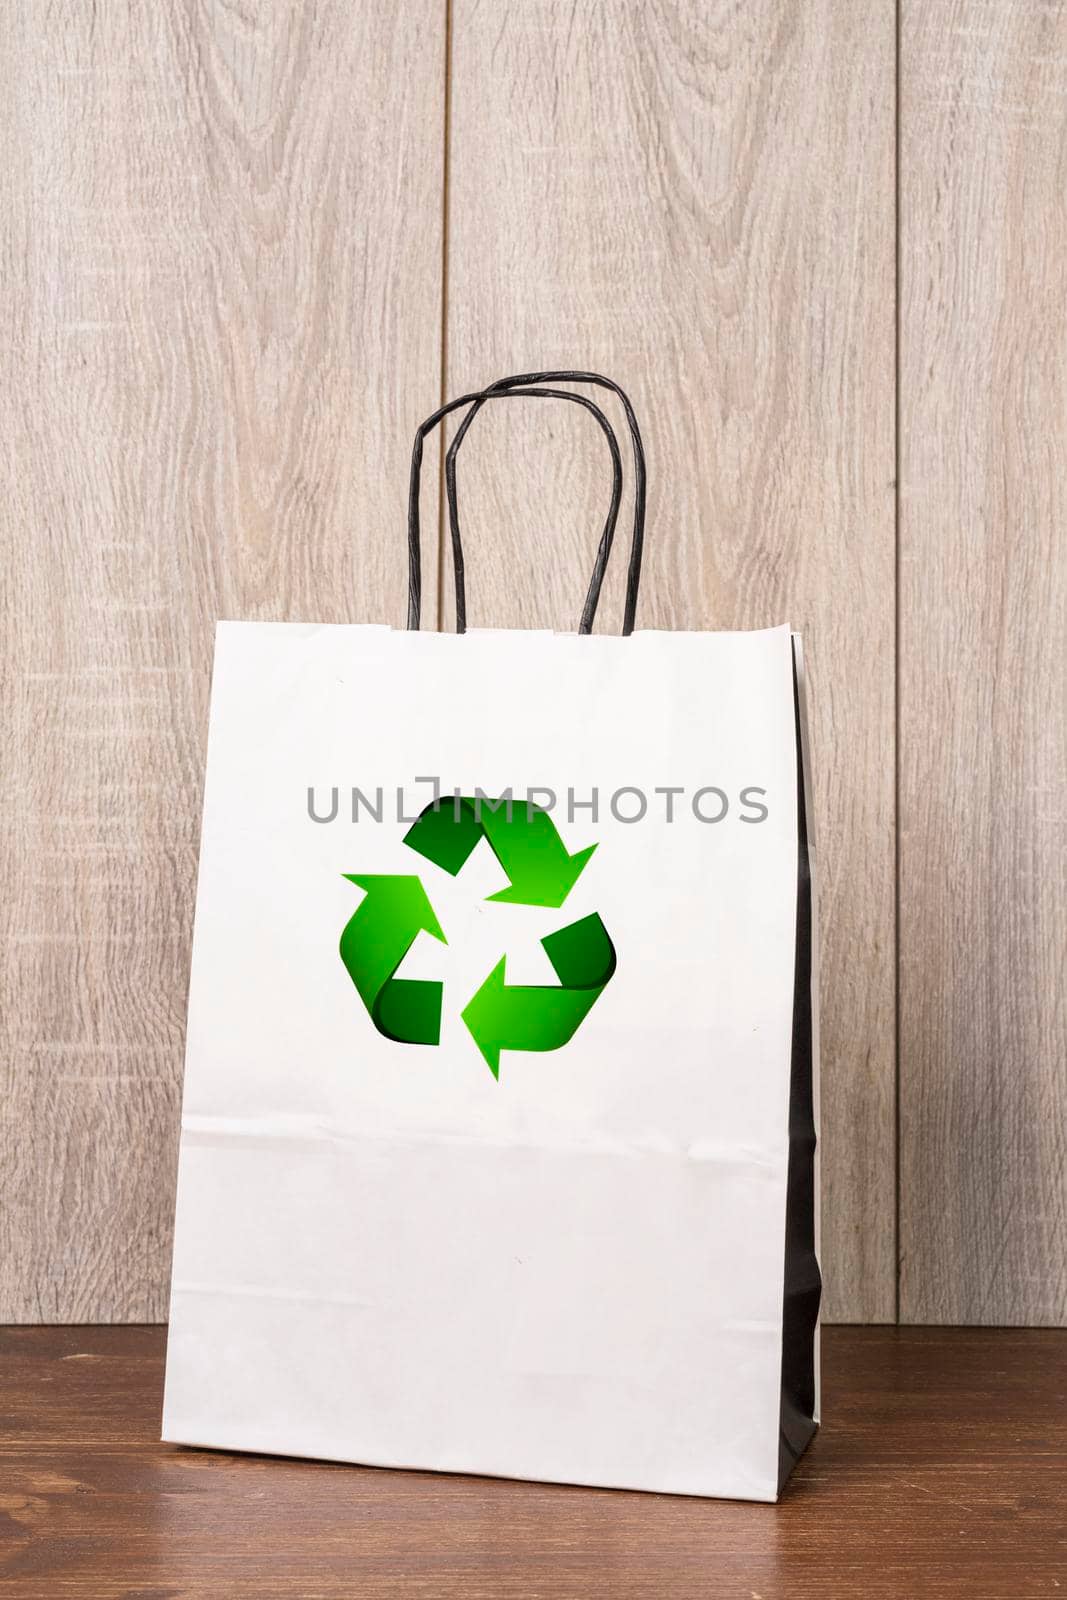 Use a reusable and recyclable bag  by sergiodv